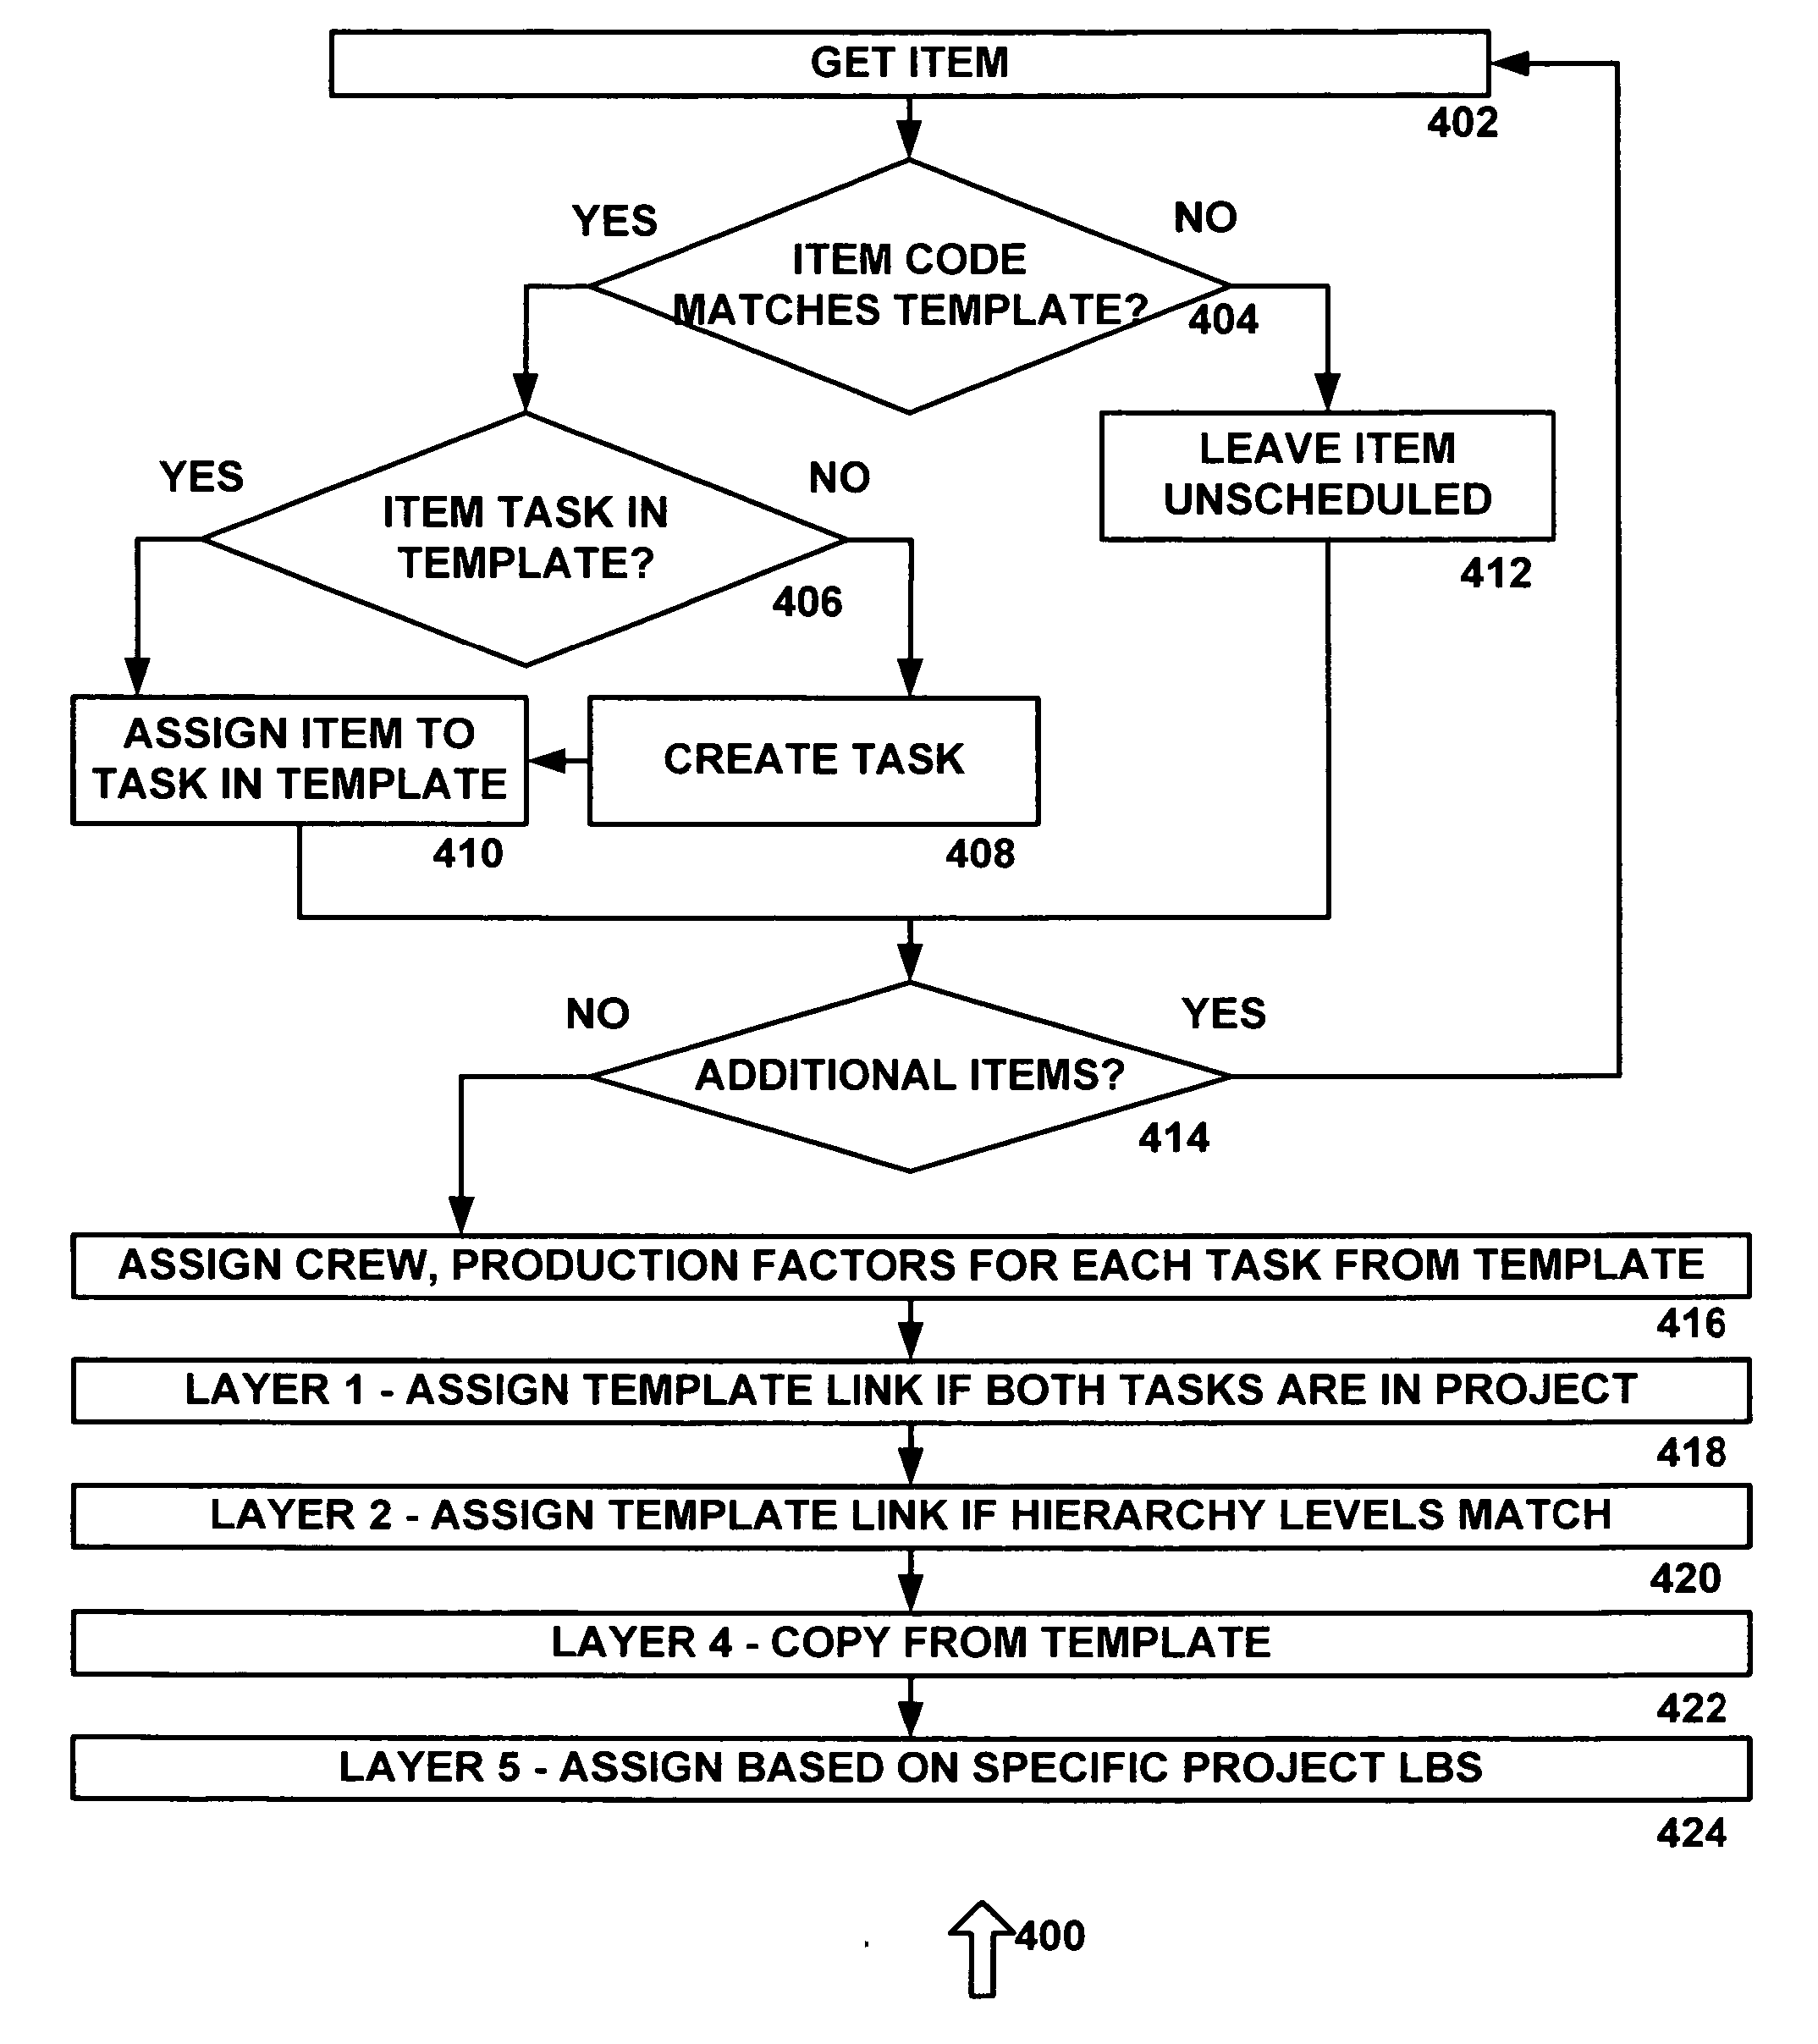 Location-based construction planning and scheduling system